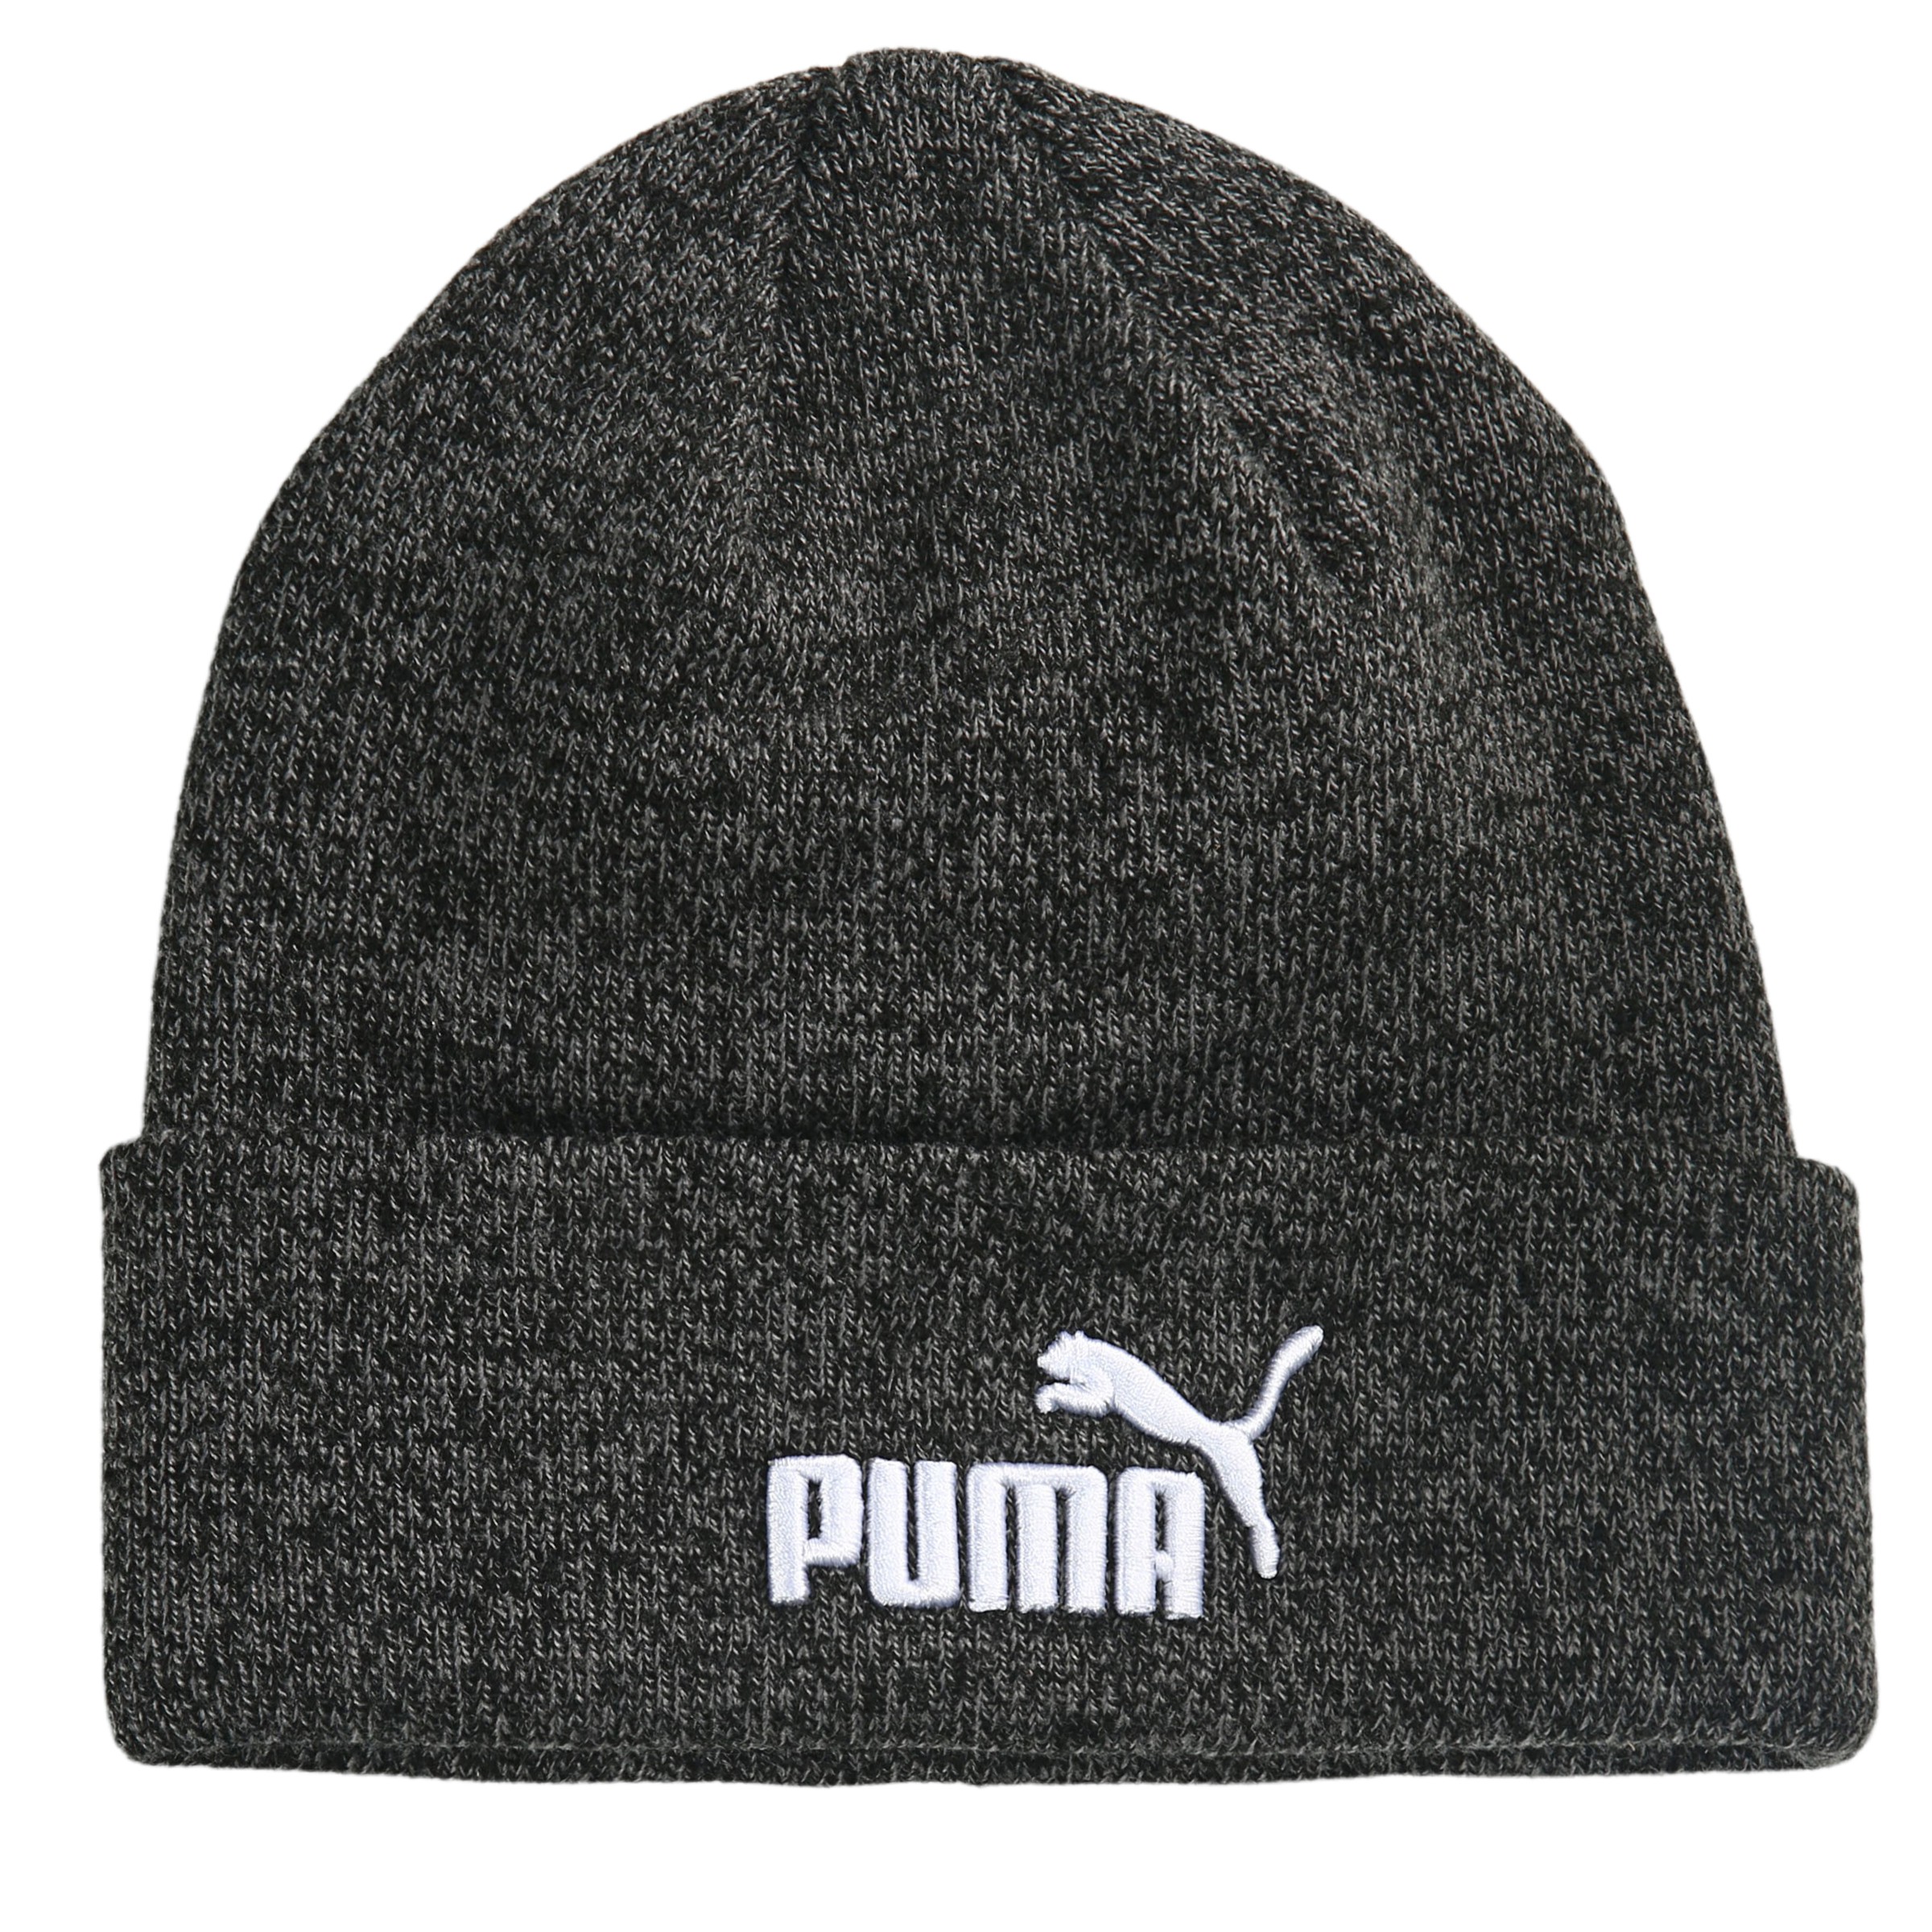 Cold Weather Beanie